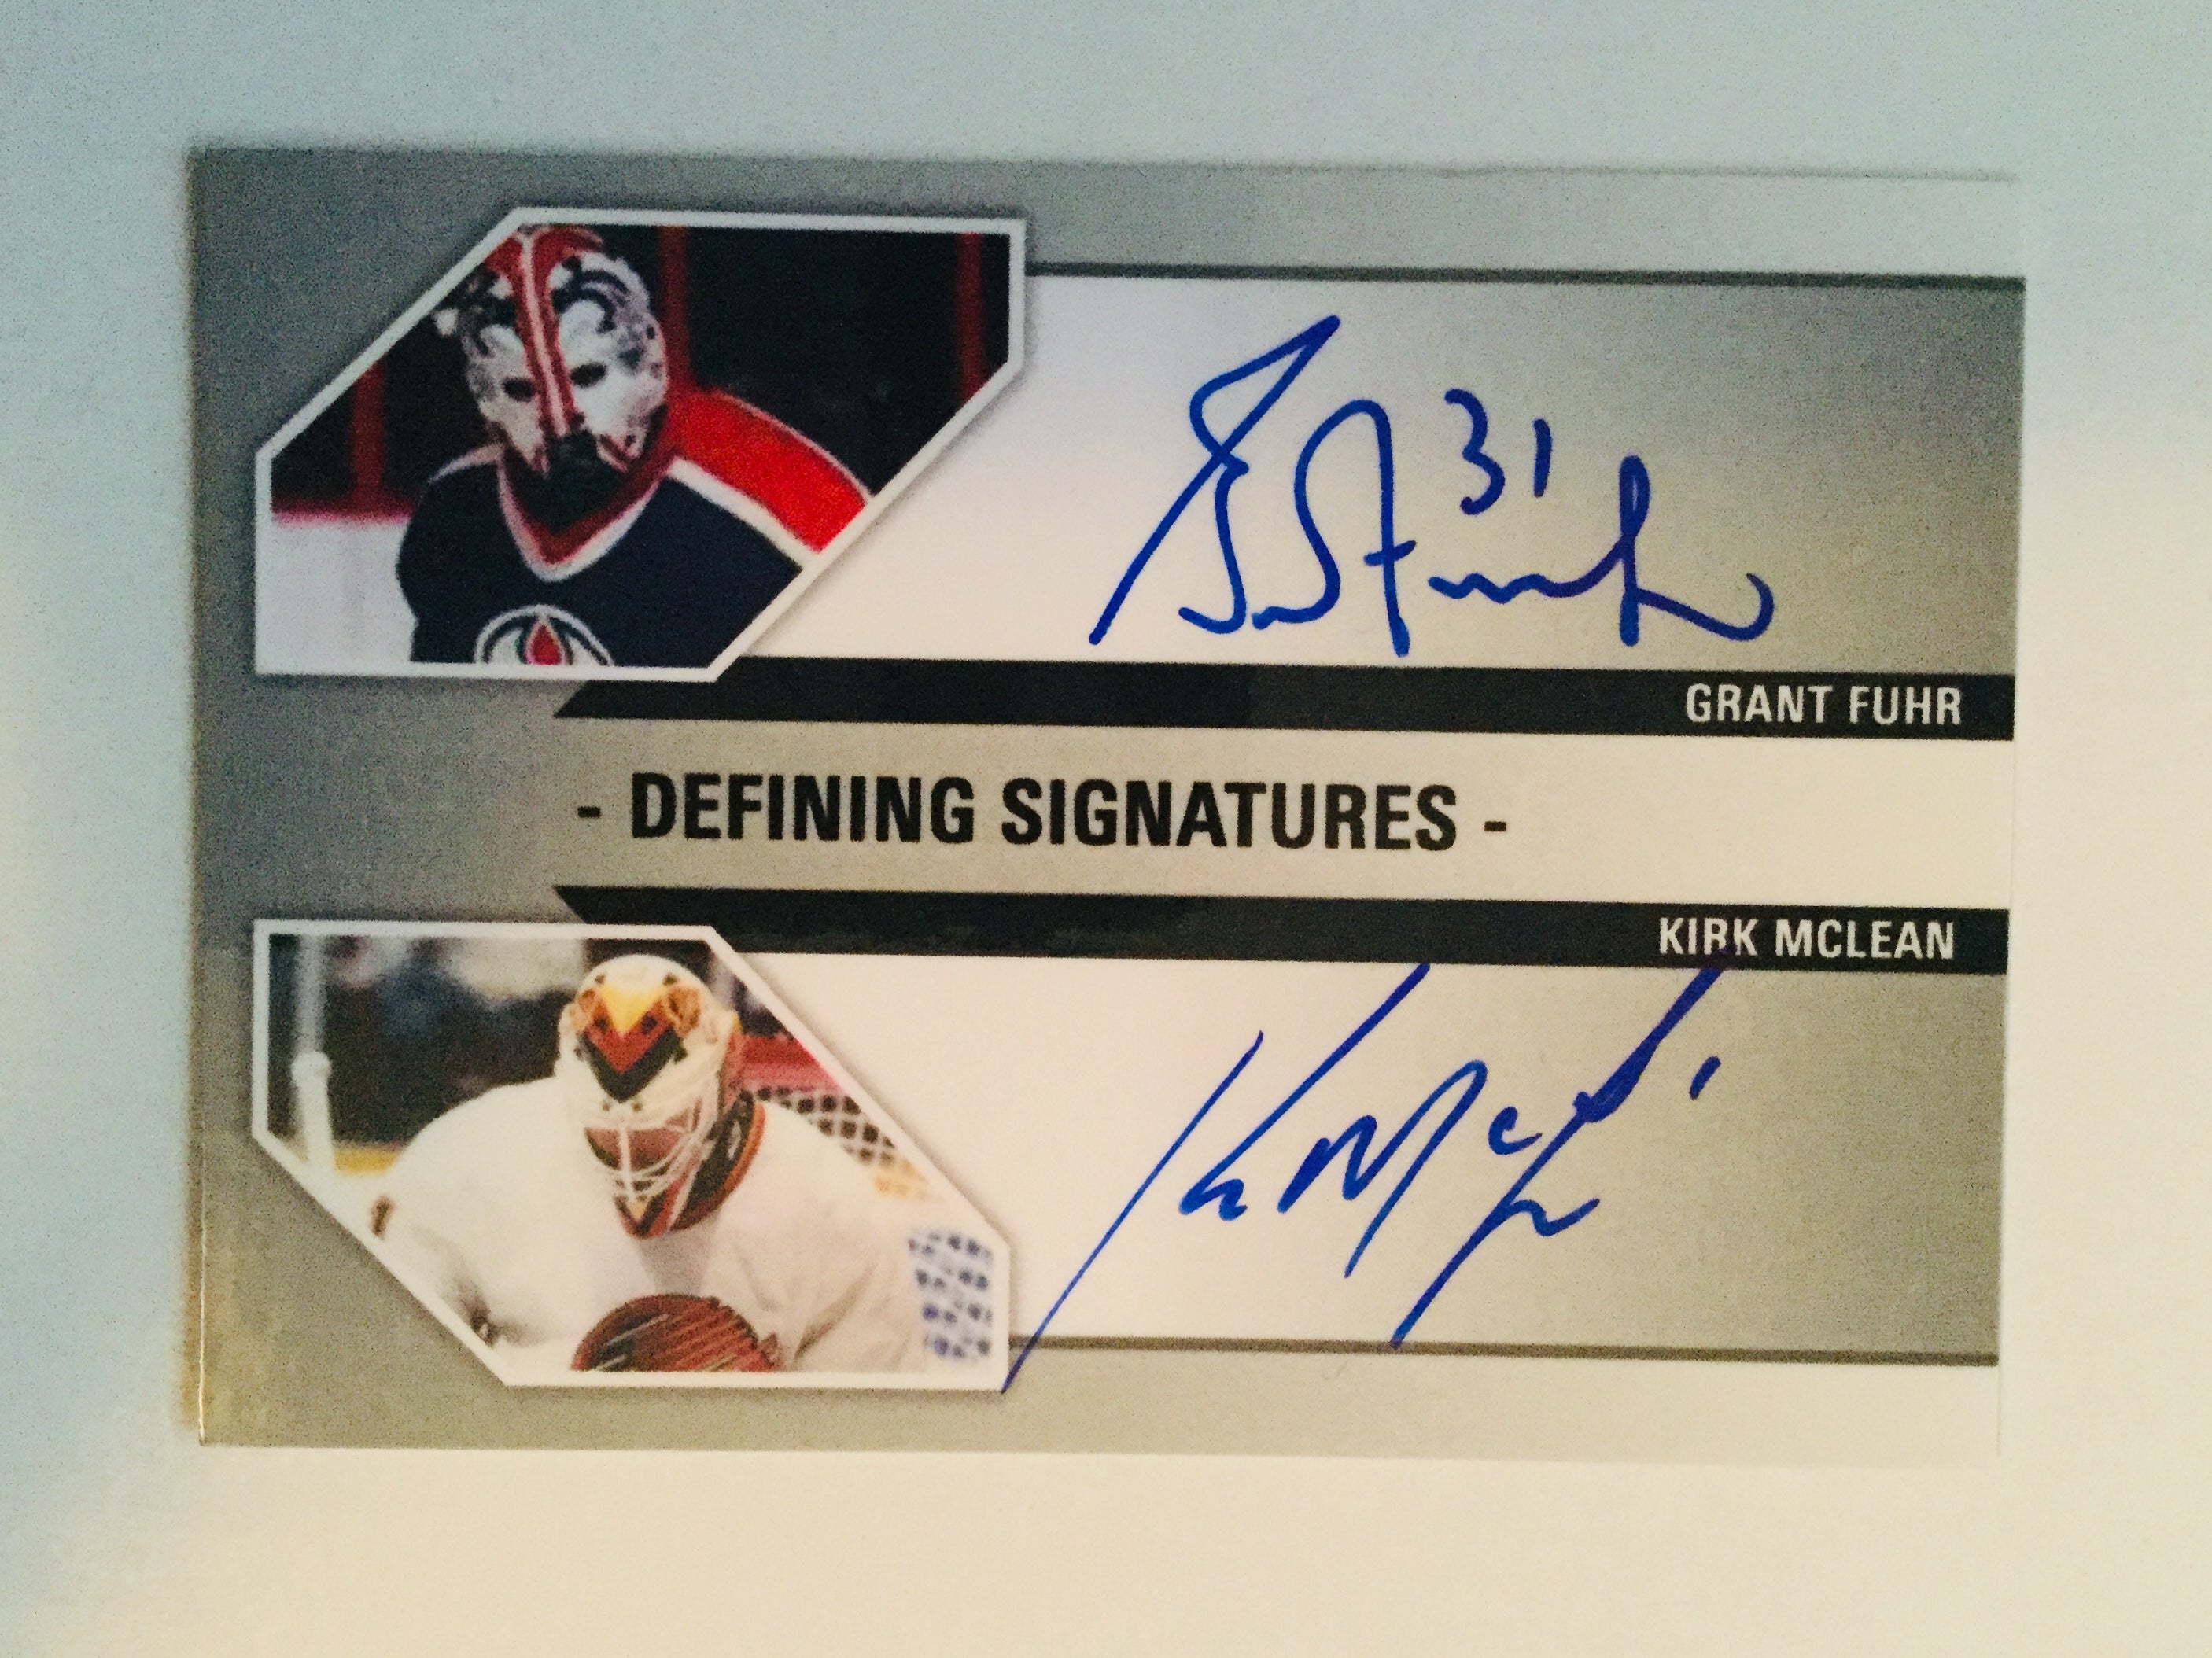 Grant Fuhr and Kirk McClean double autograph hockey card